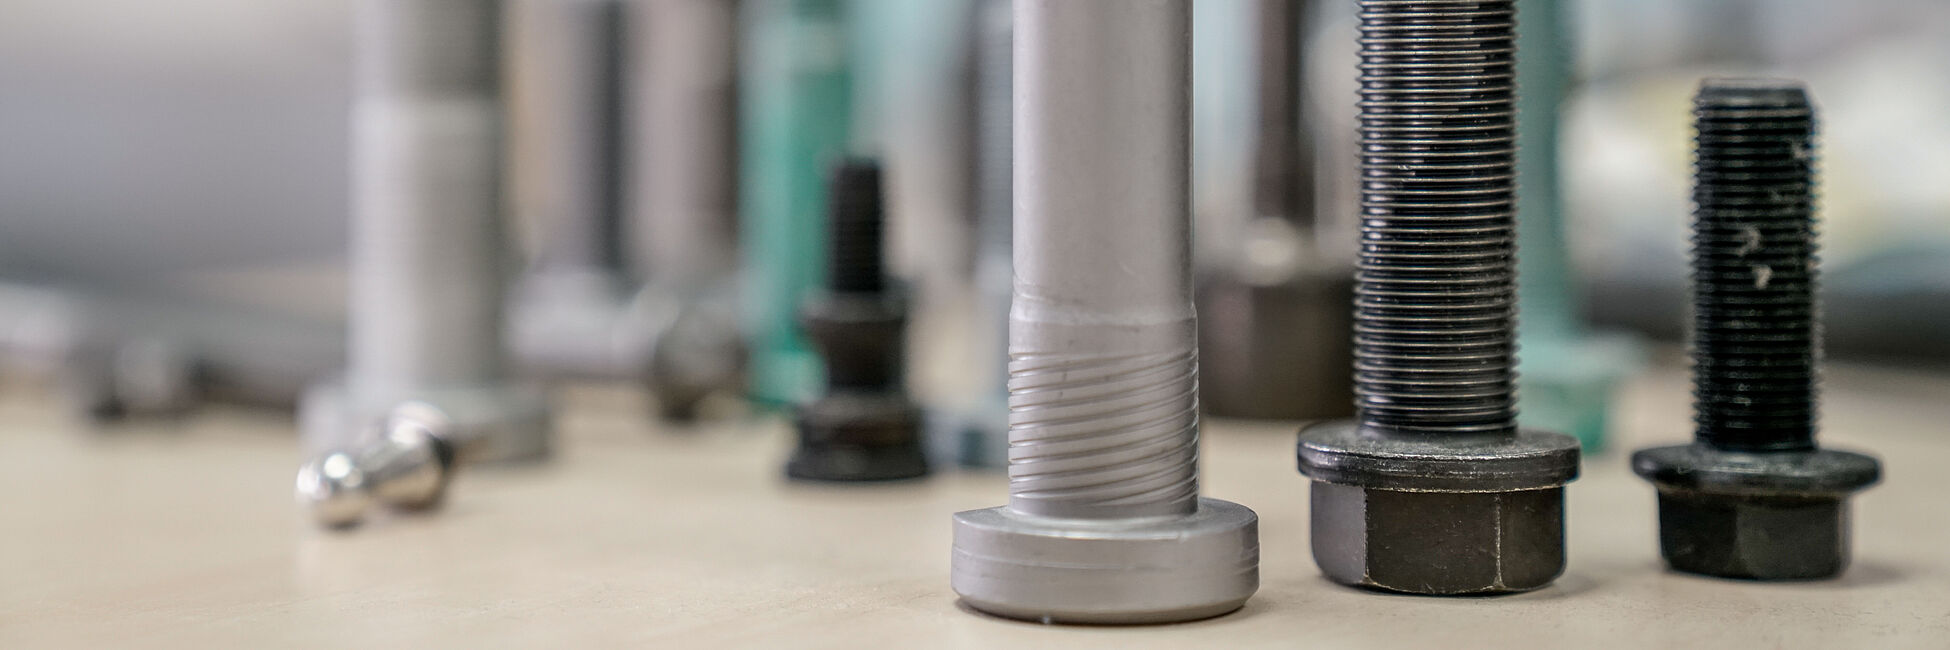 Different types of fasteners used in manufacturing: Screws, bolts & beyond